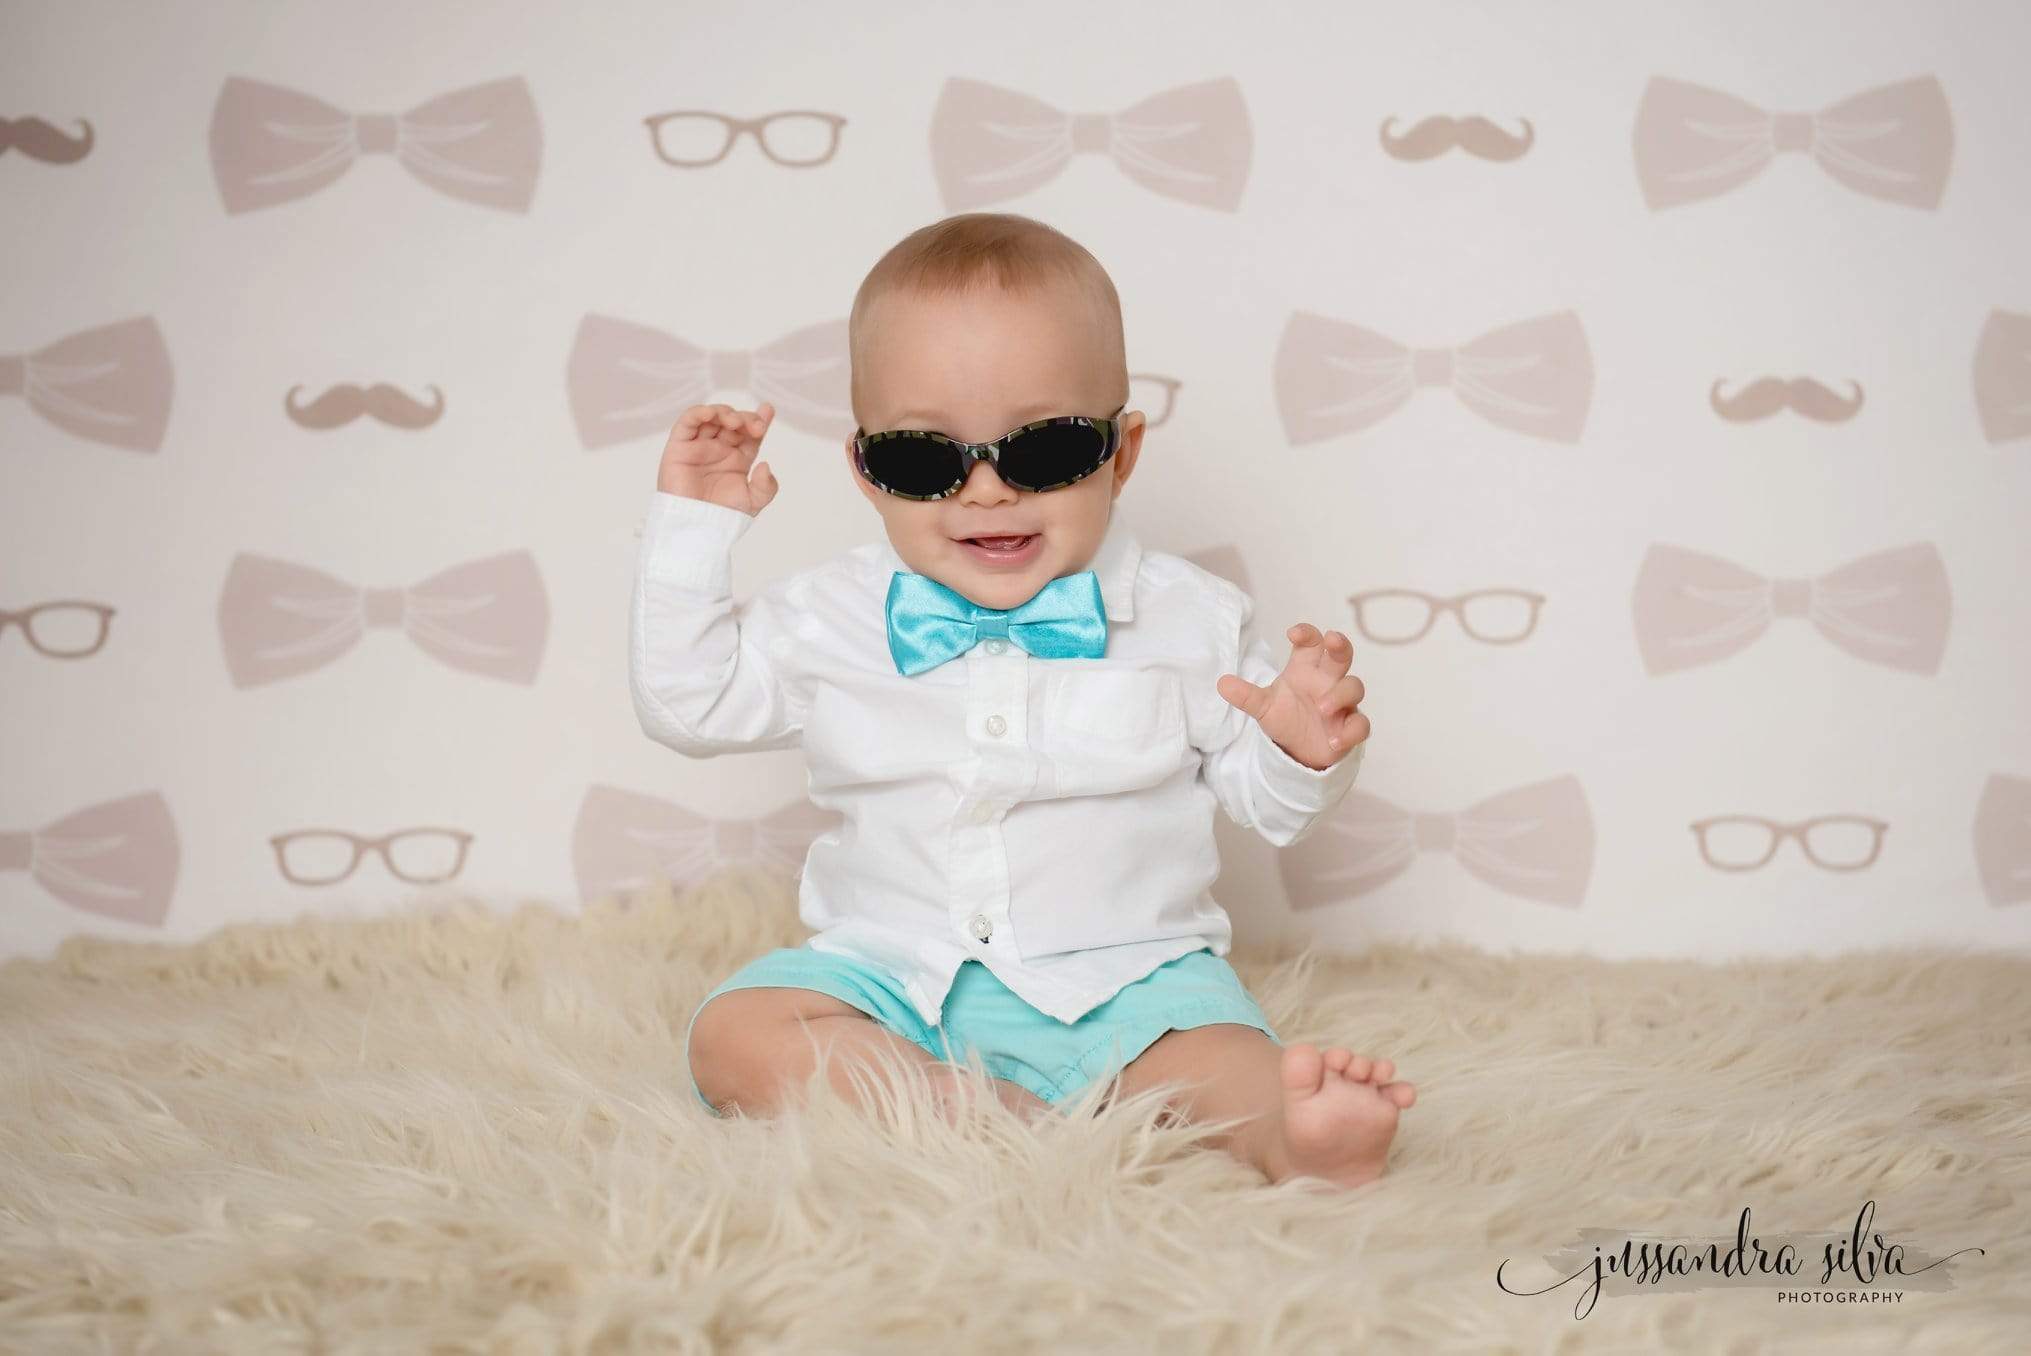 Kate Bowties for Little Guys in Brown Father's Day Backdrop for Photography Designed by Amanda Moffatt